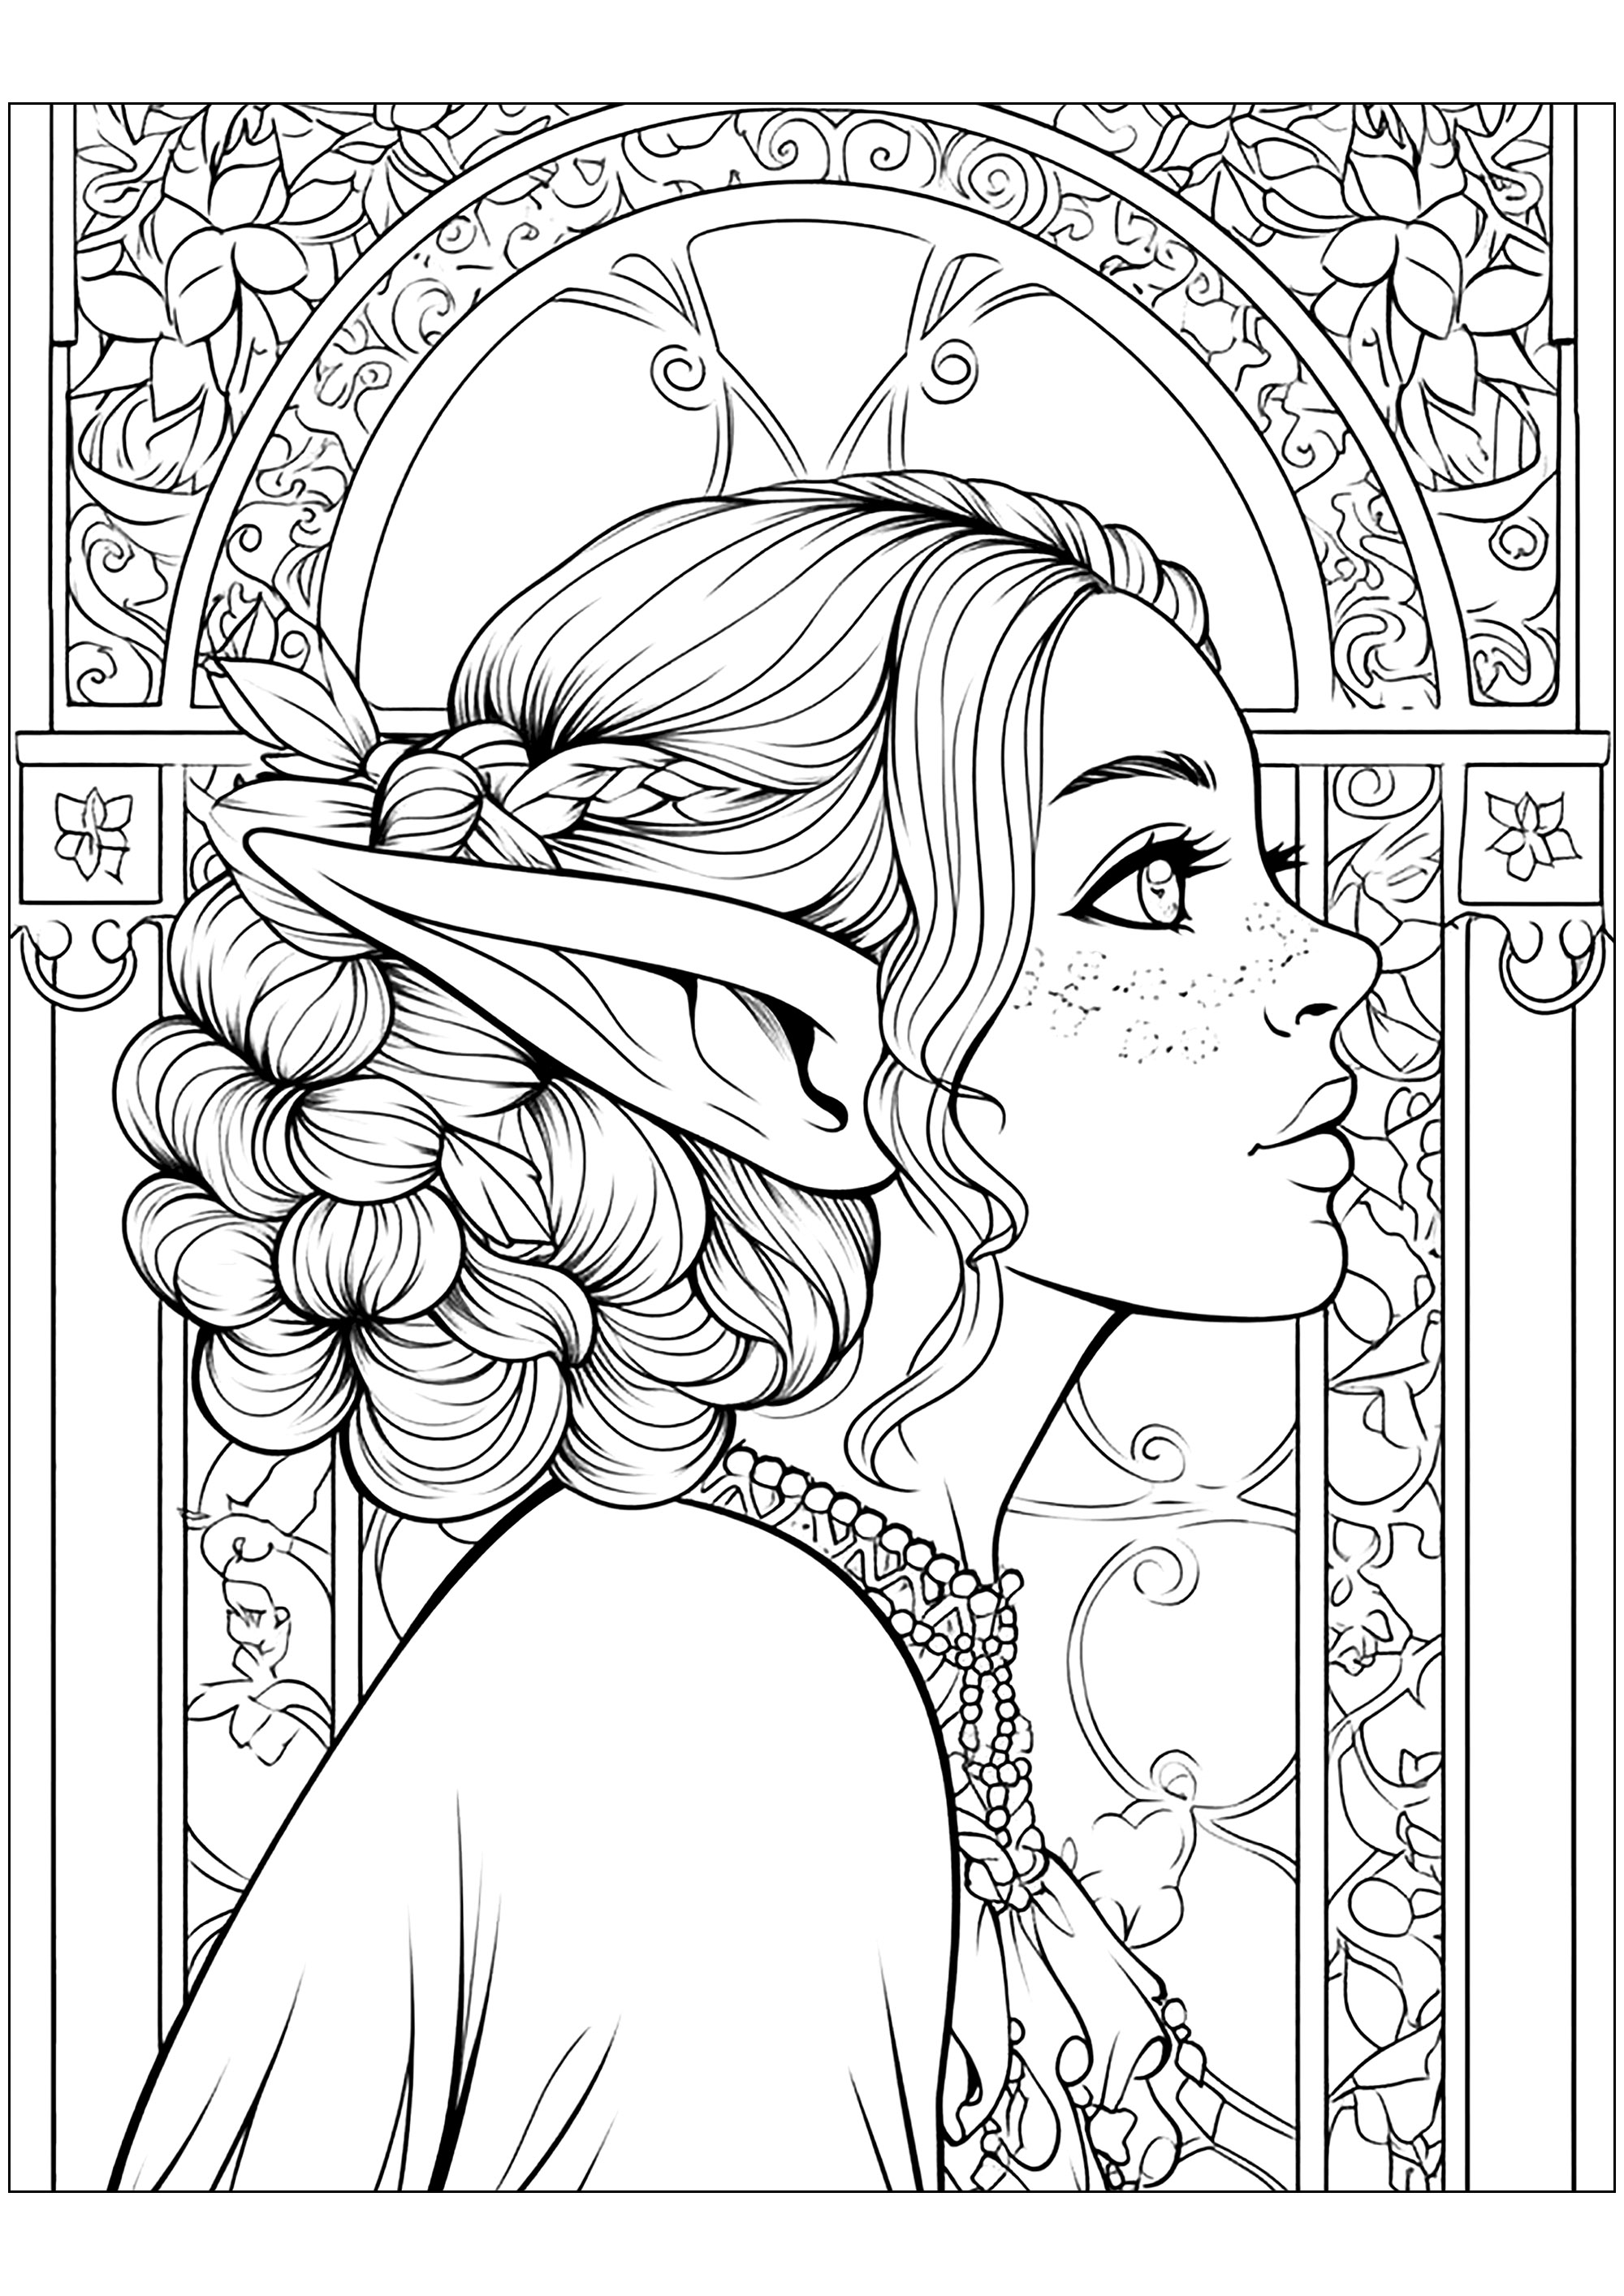 Drawing of an Elf in Art Nouveau style. Pretty details to color in the background